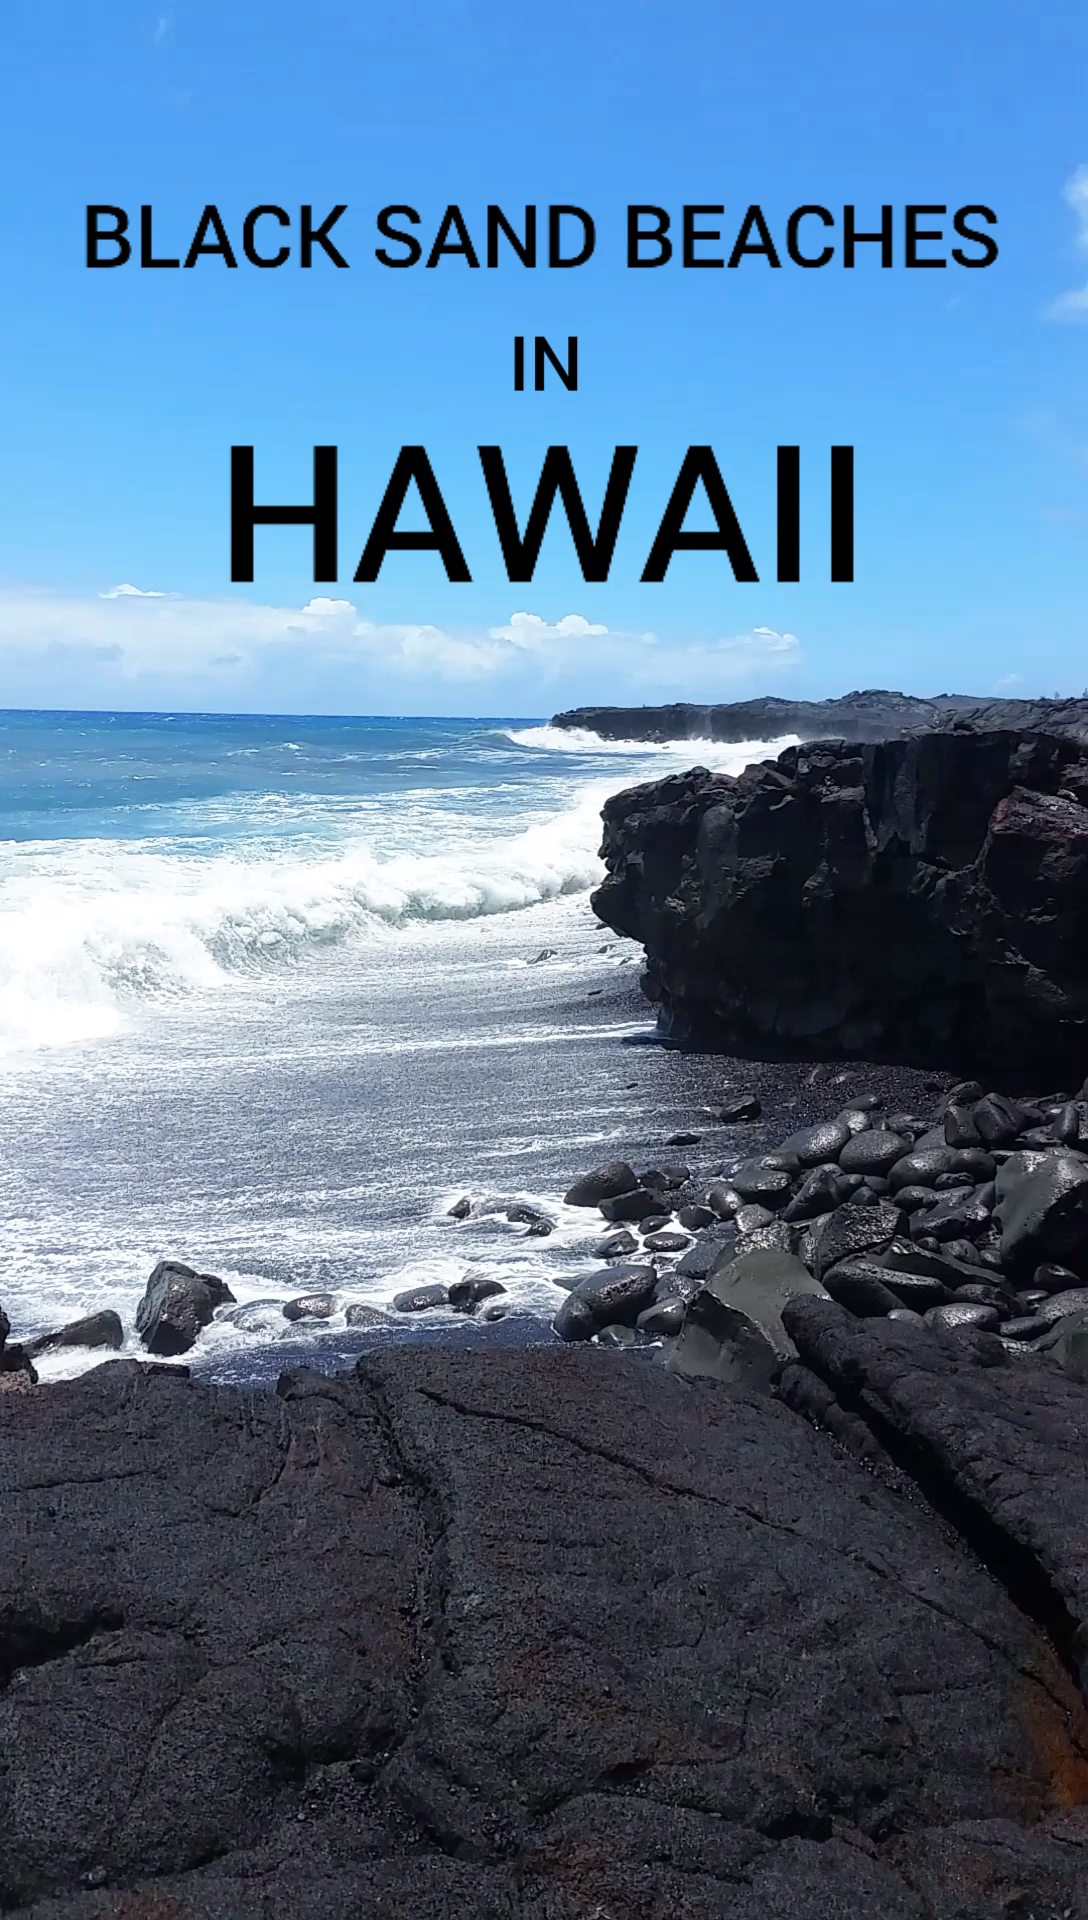 Black sand beaches in Hawaii рџЊґ US beach vacation ideas -   17 unique holiday Destinations ideas